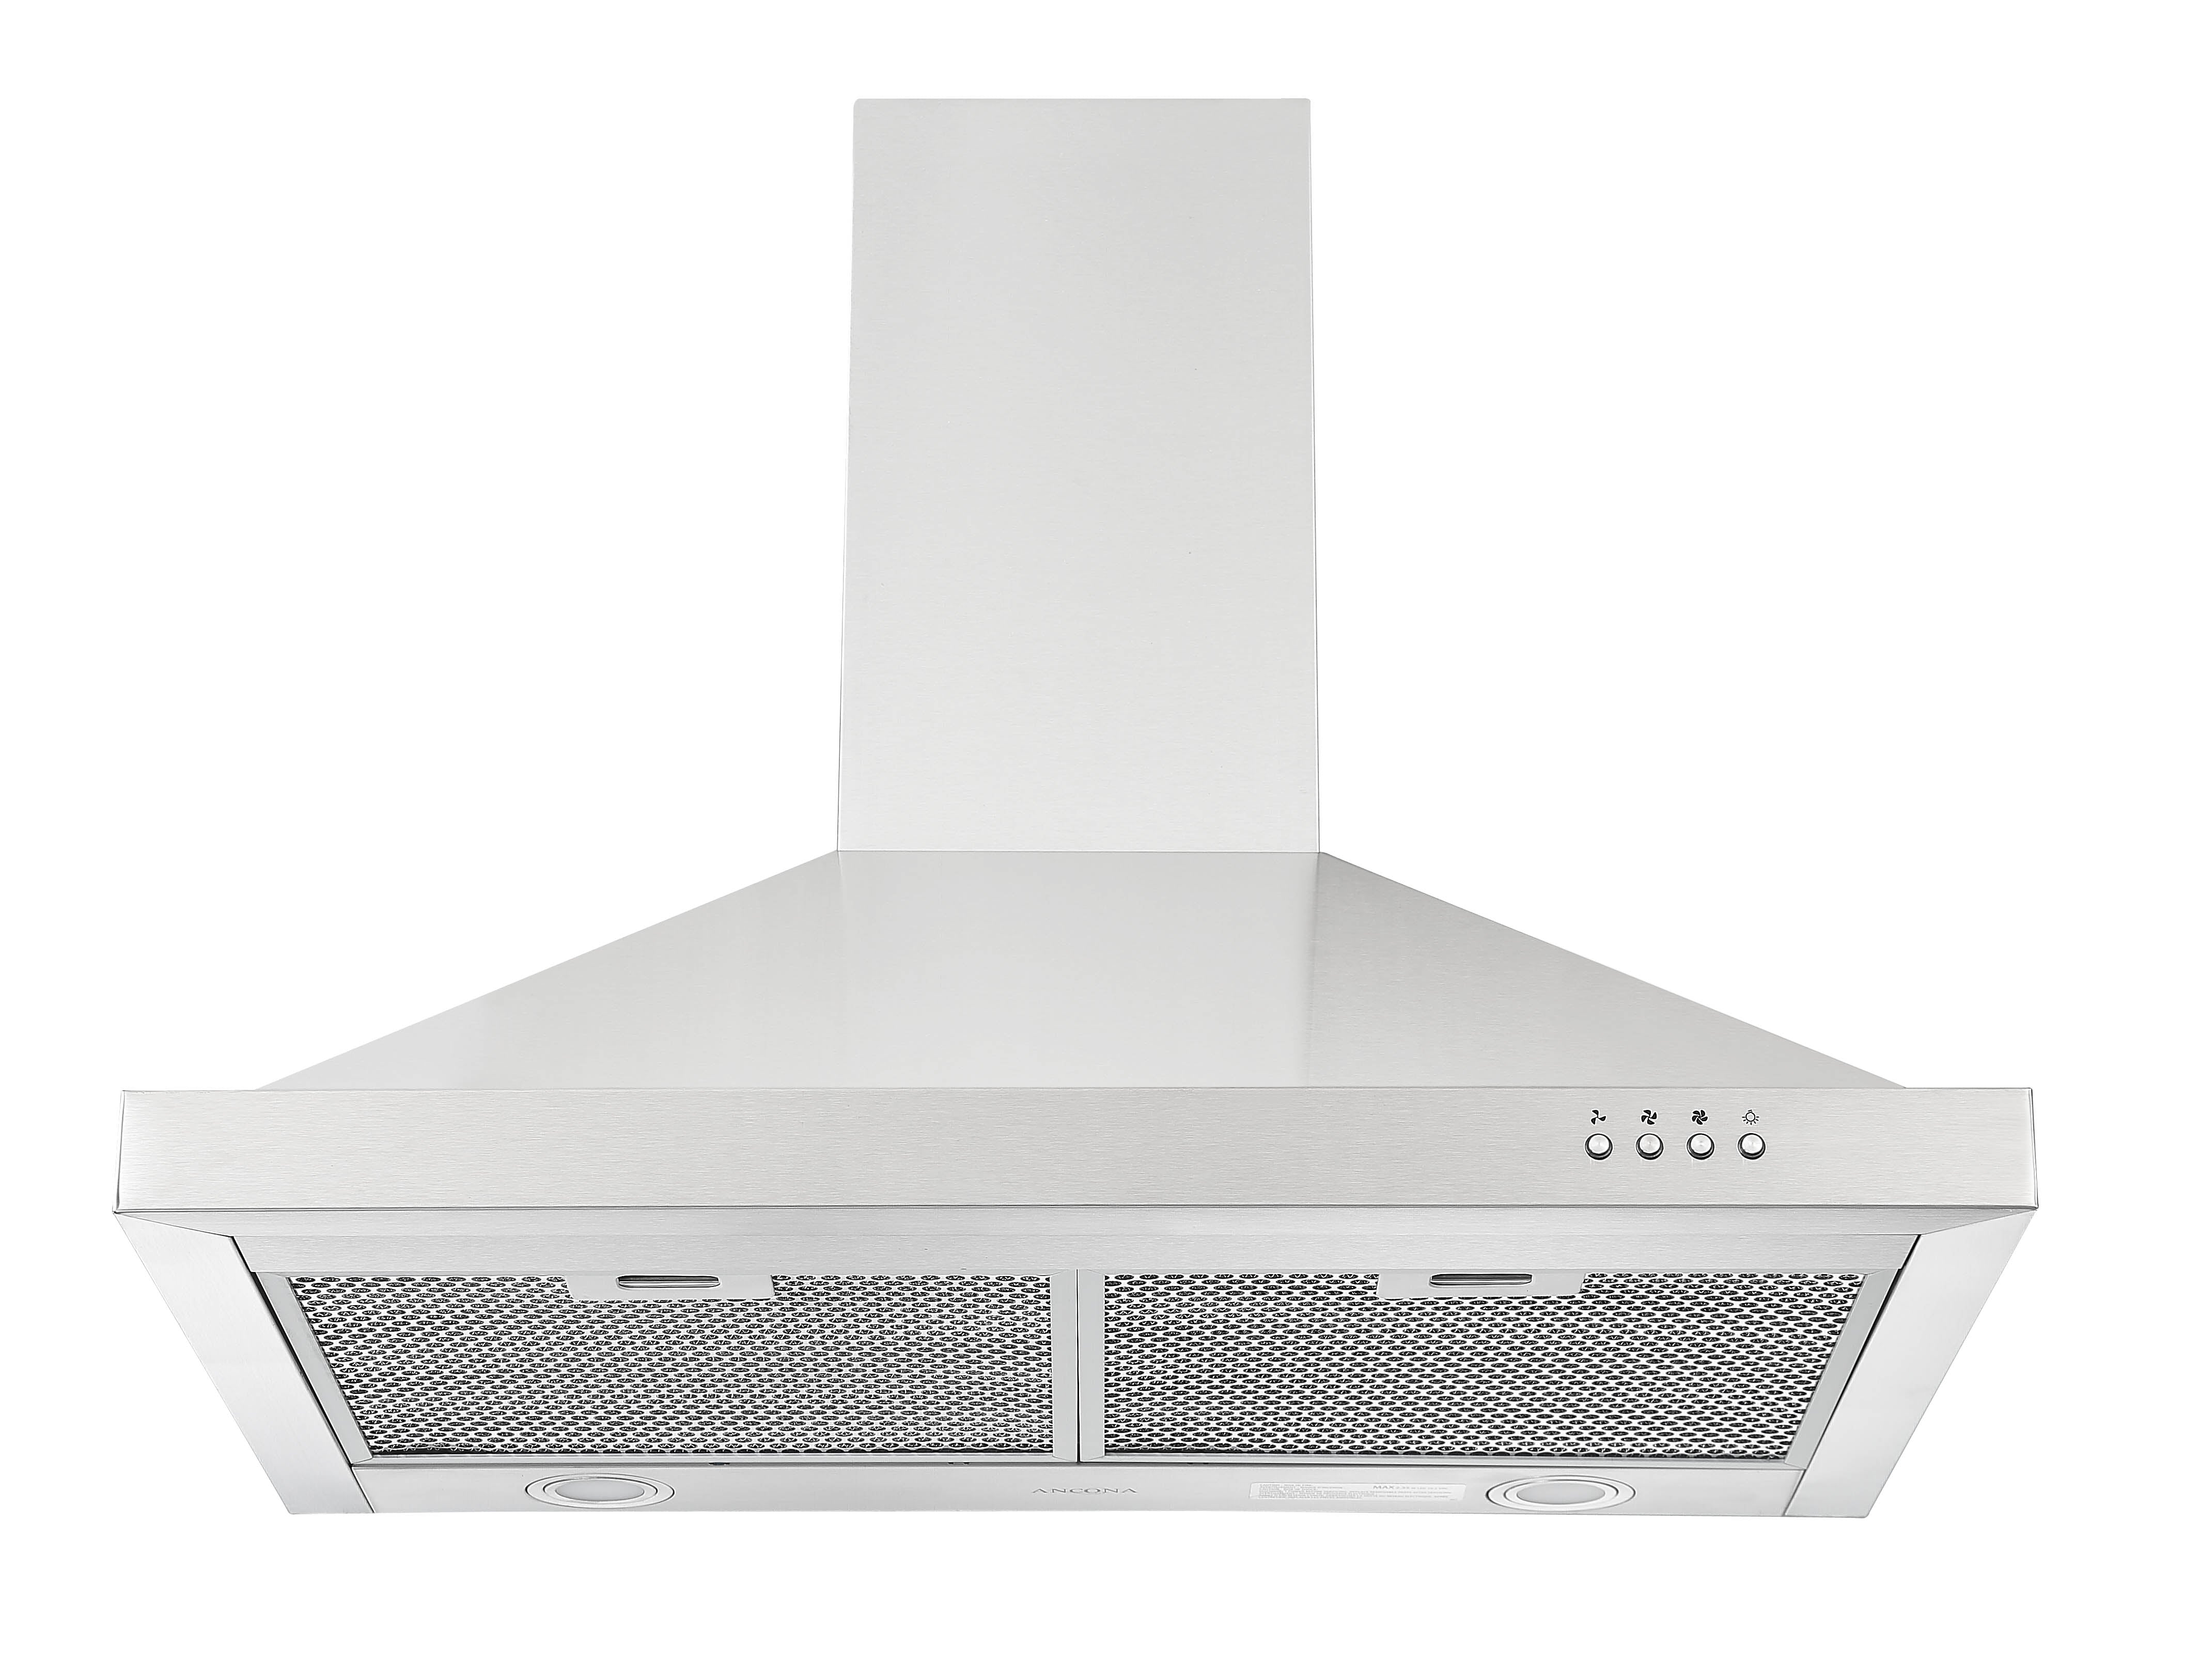 WRRV430 30 in. Rear-Vented Wall Mount Pyramid Range Hood in Stainless Steel